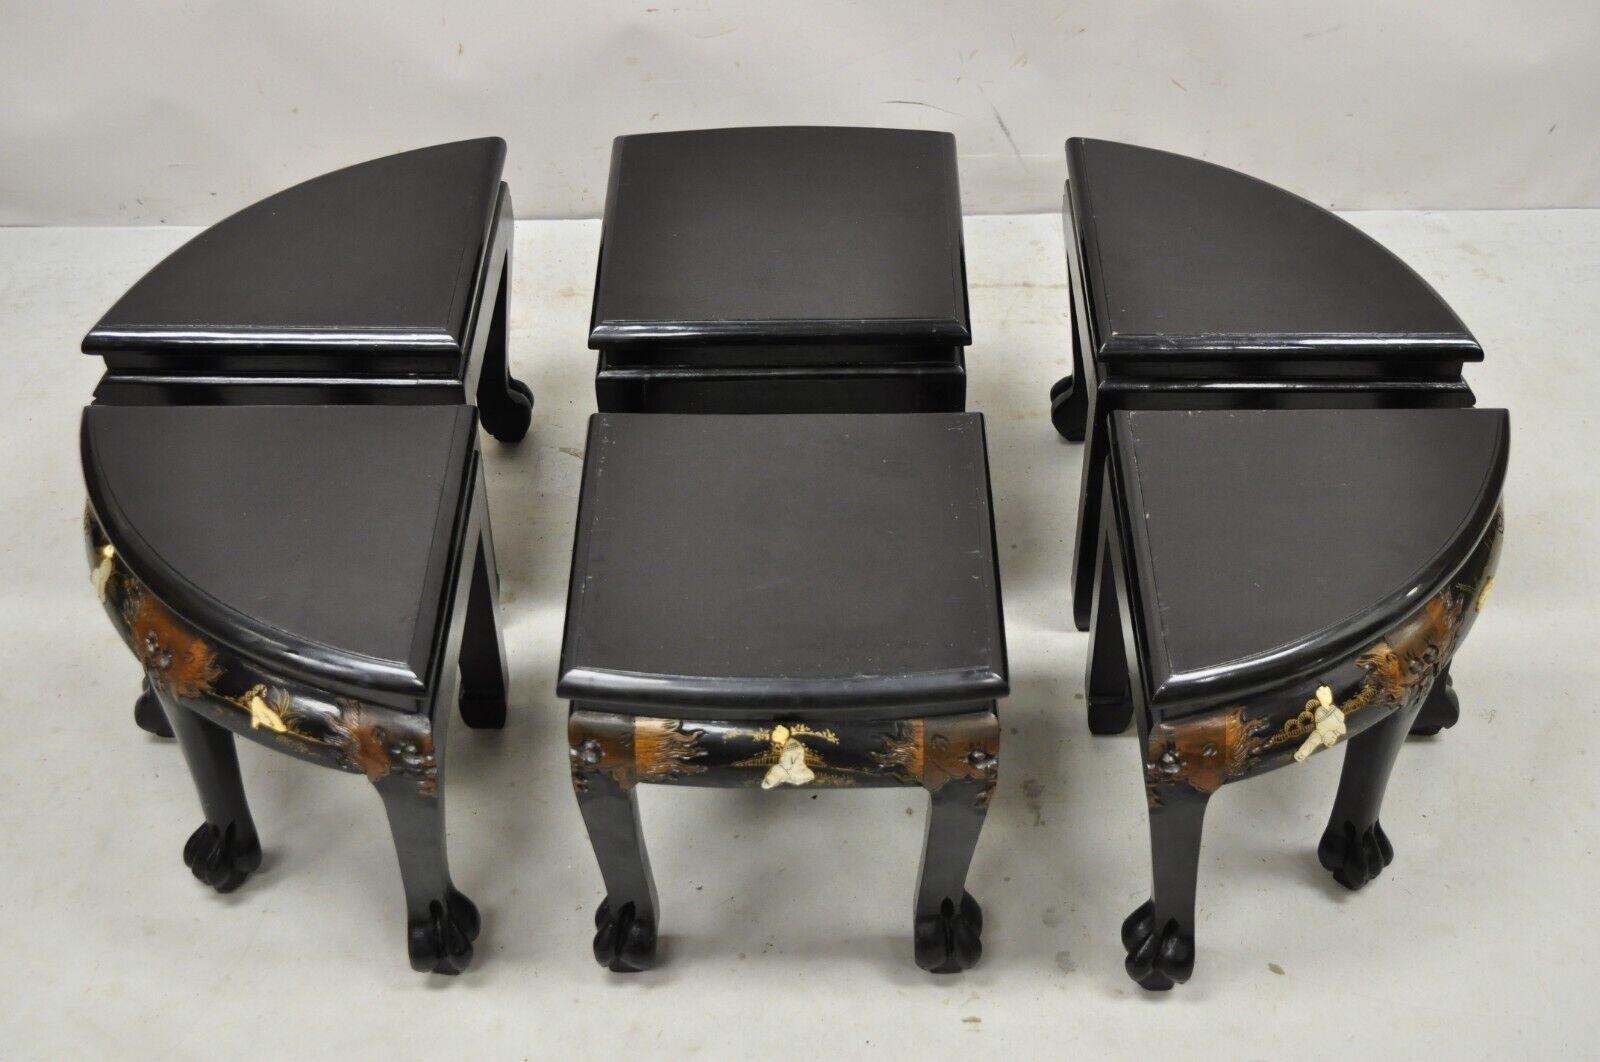 Chinese Black Lacquer Mother of Pearl Oval Nesting Coffee Table Set 6 Stools - A For Sale 3